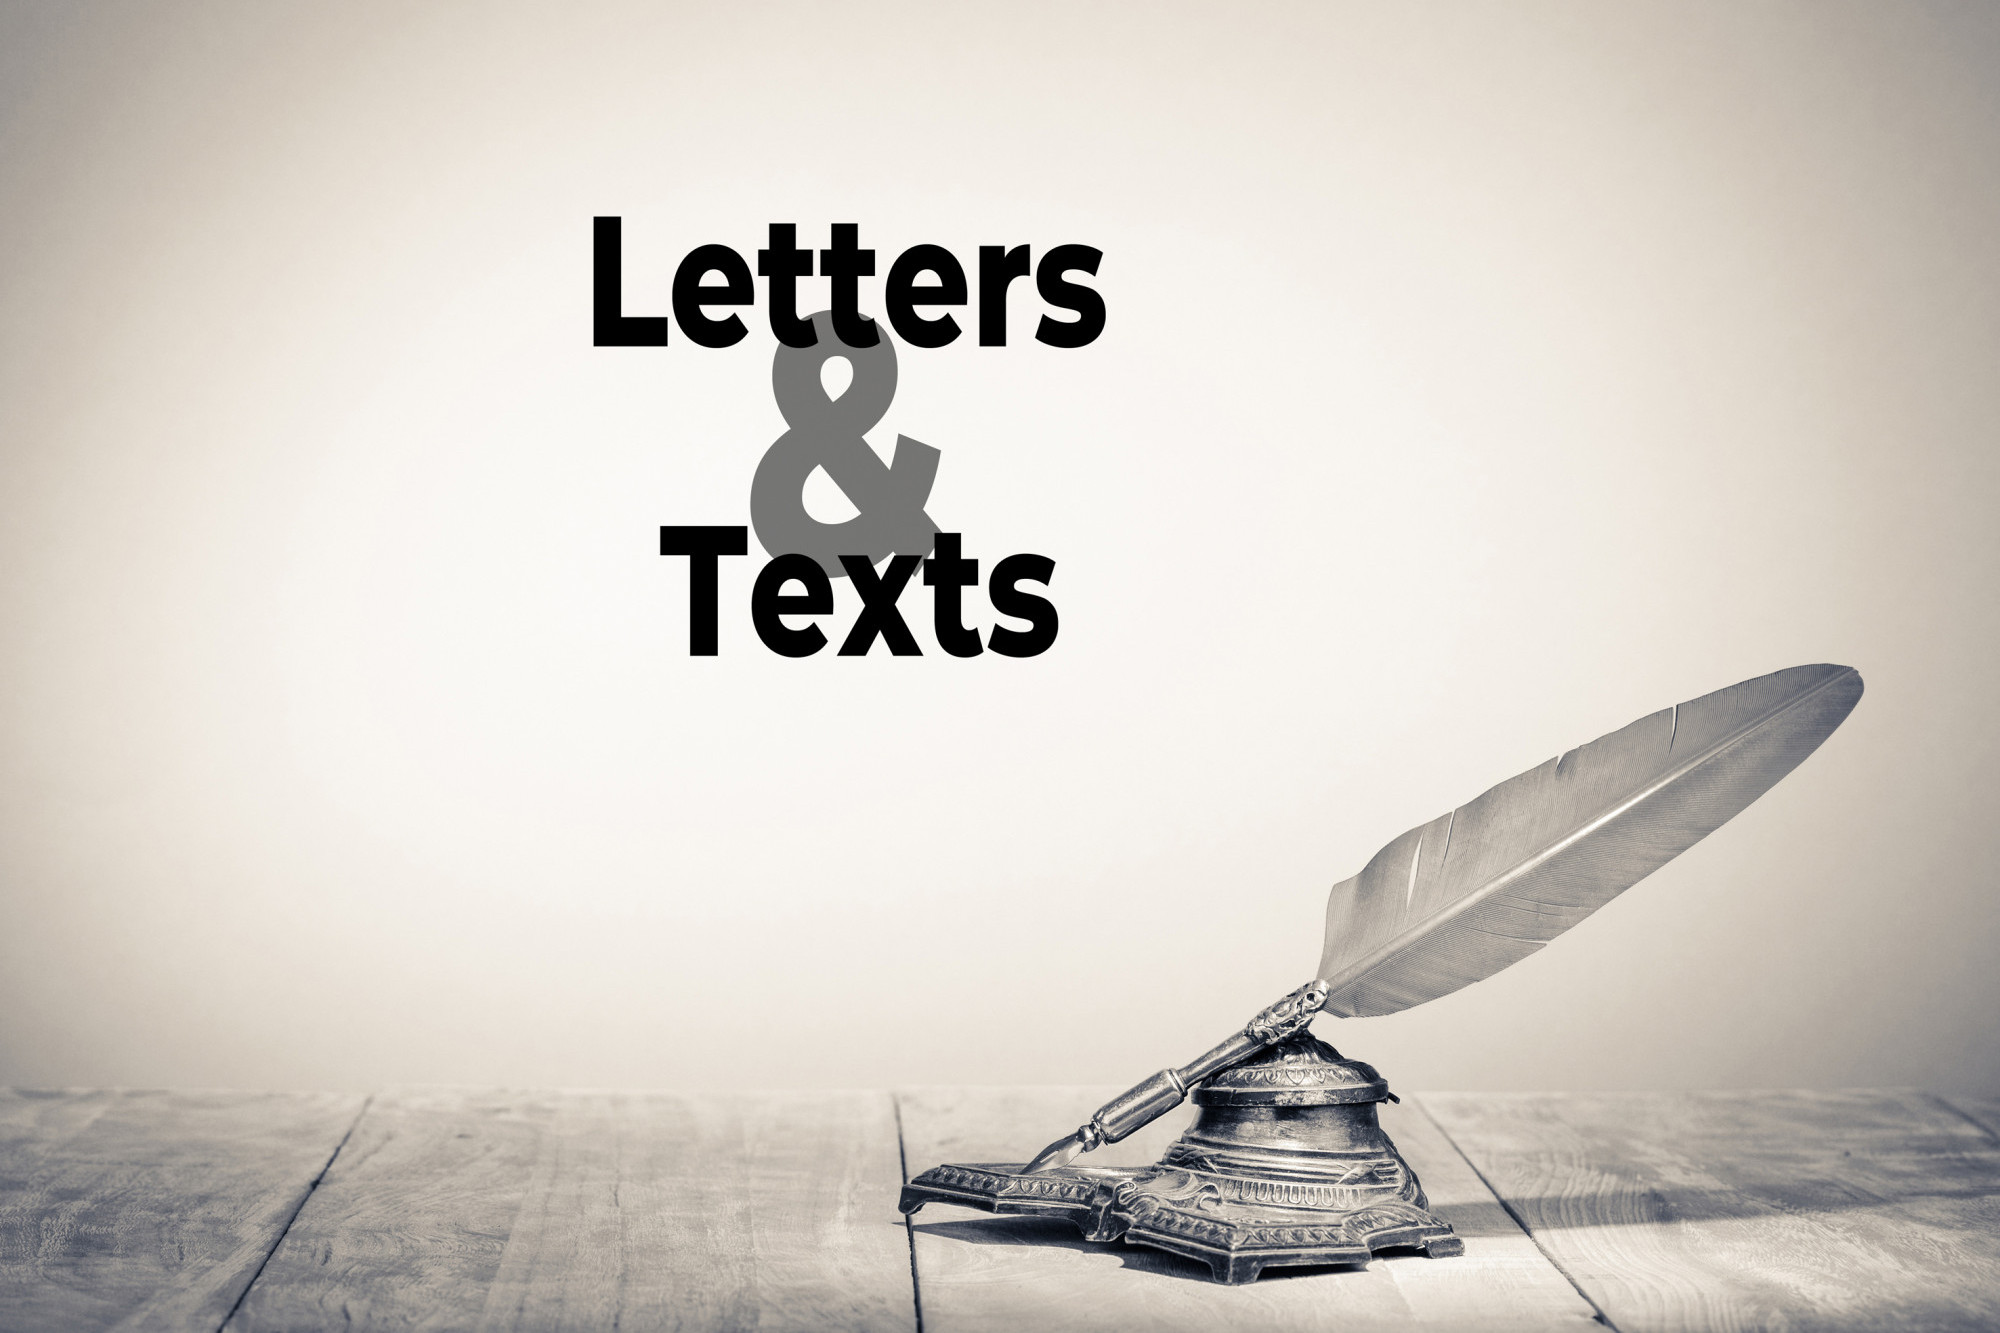 Letters and Texts to the Editor March 19, 2021 - feature photo